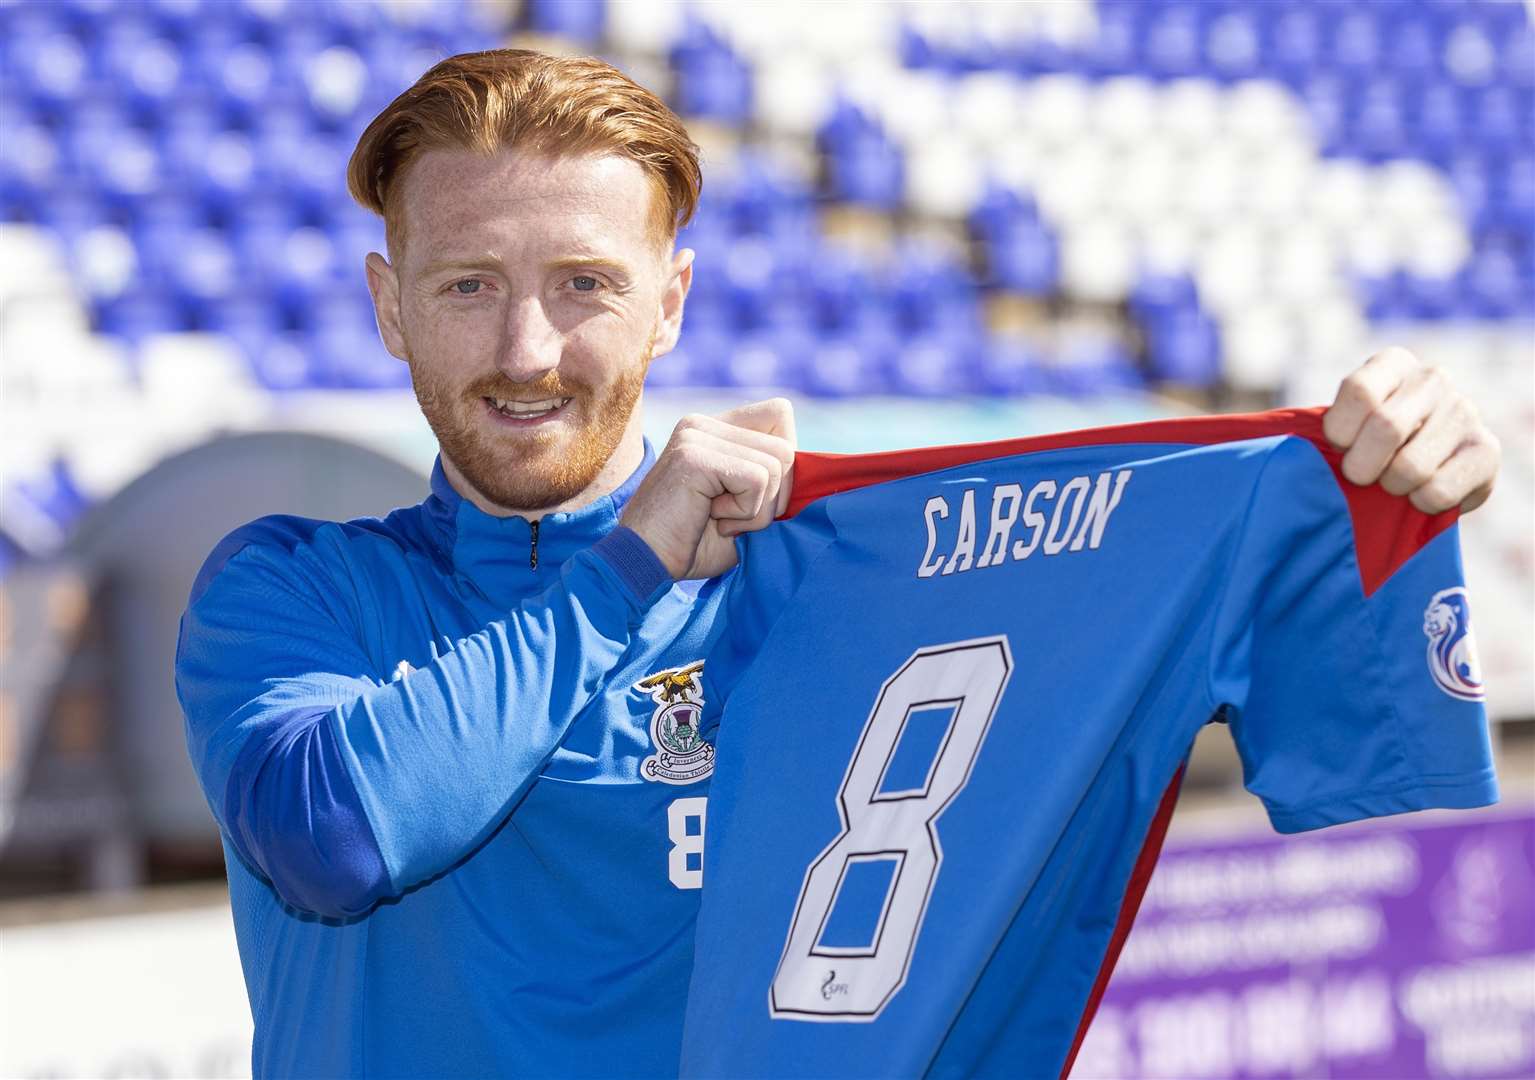 Picture - Ken Macpherson, Inverness. See press release/story. ICT’s David Carson is pictured yesterday (Fri) after signing a new 3-year contract with the club keeping him in Inverness until 2024.